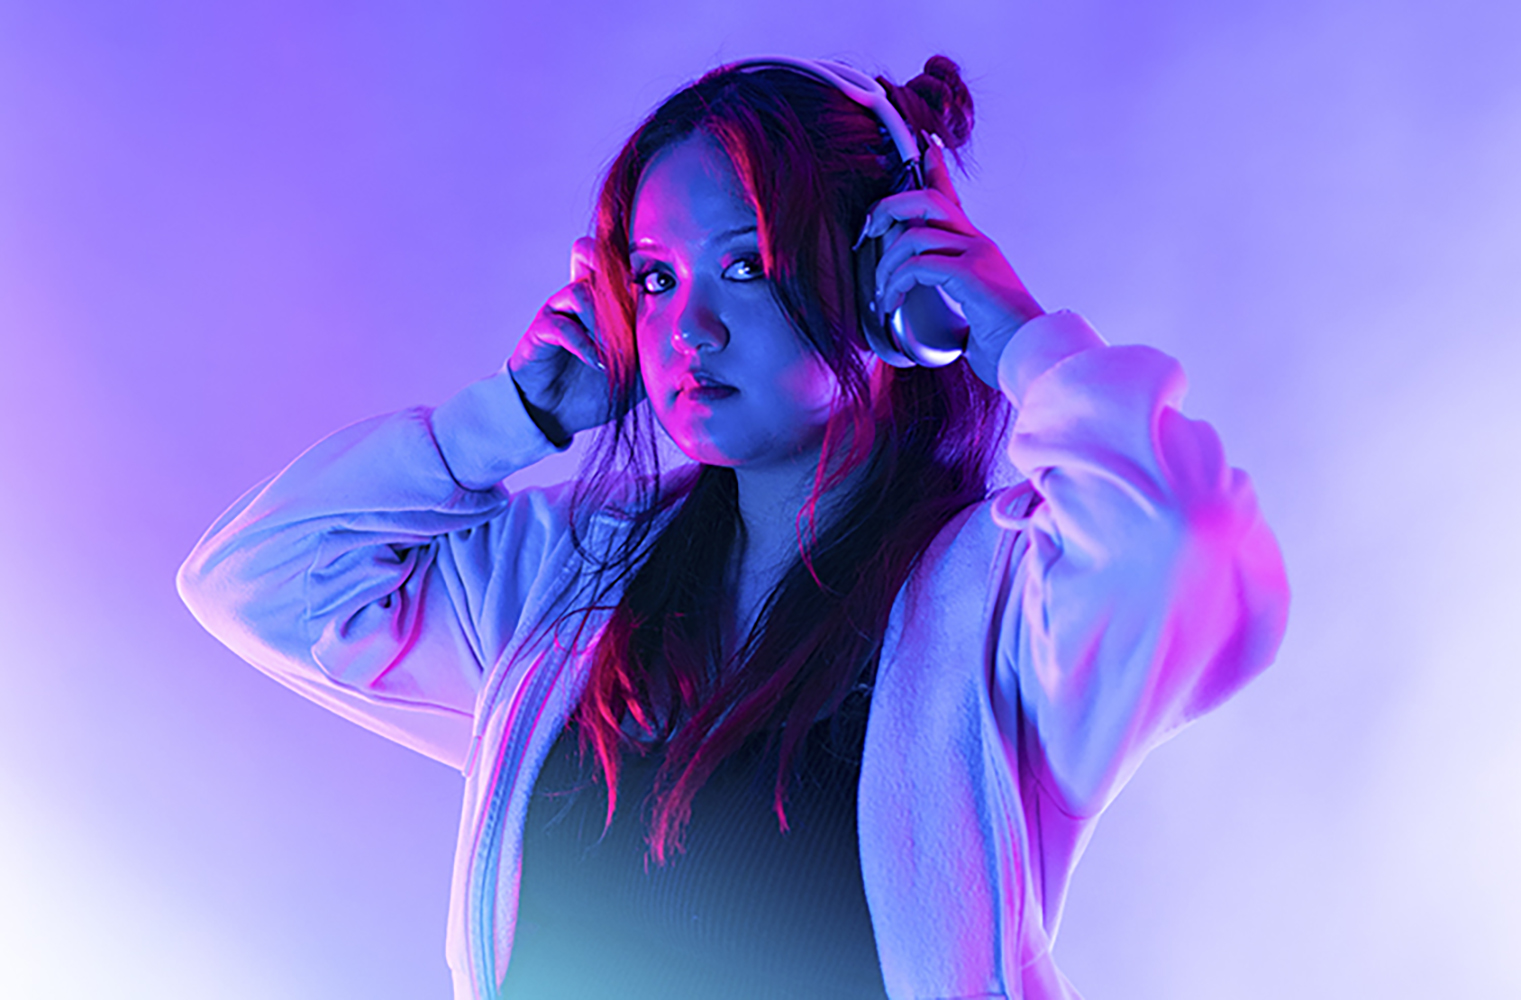 Sofia Beltran stands in a hooded sweatshirt with headphones on, looking at the camera.